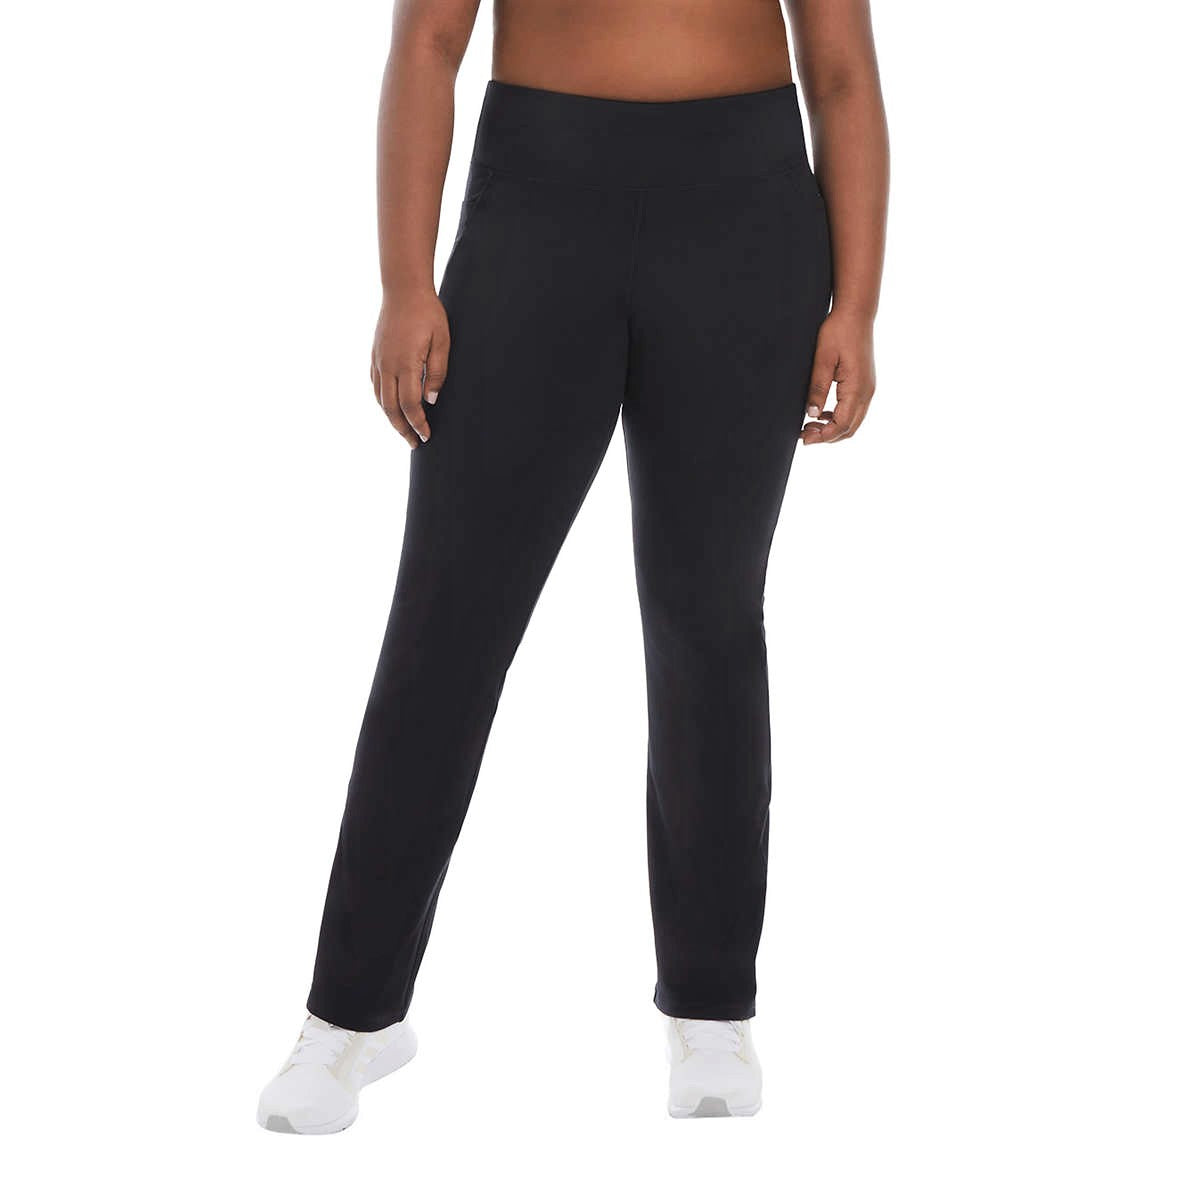 Jockey Women's Activewear Cotton Stretch Ankle Legging, Black, S at Amazon  Women's Clothing store: Athletic Pants